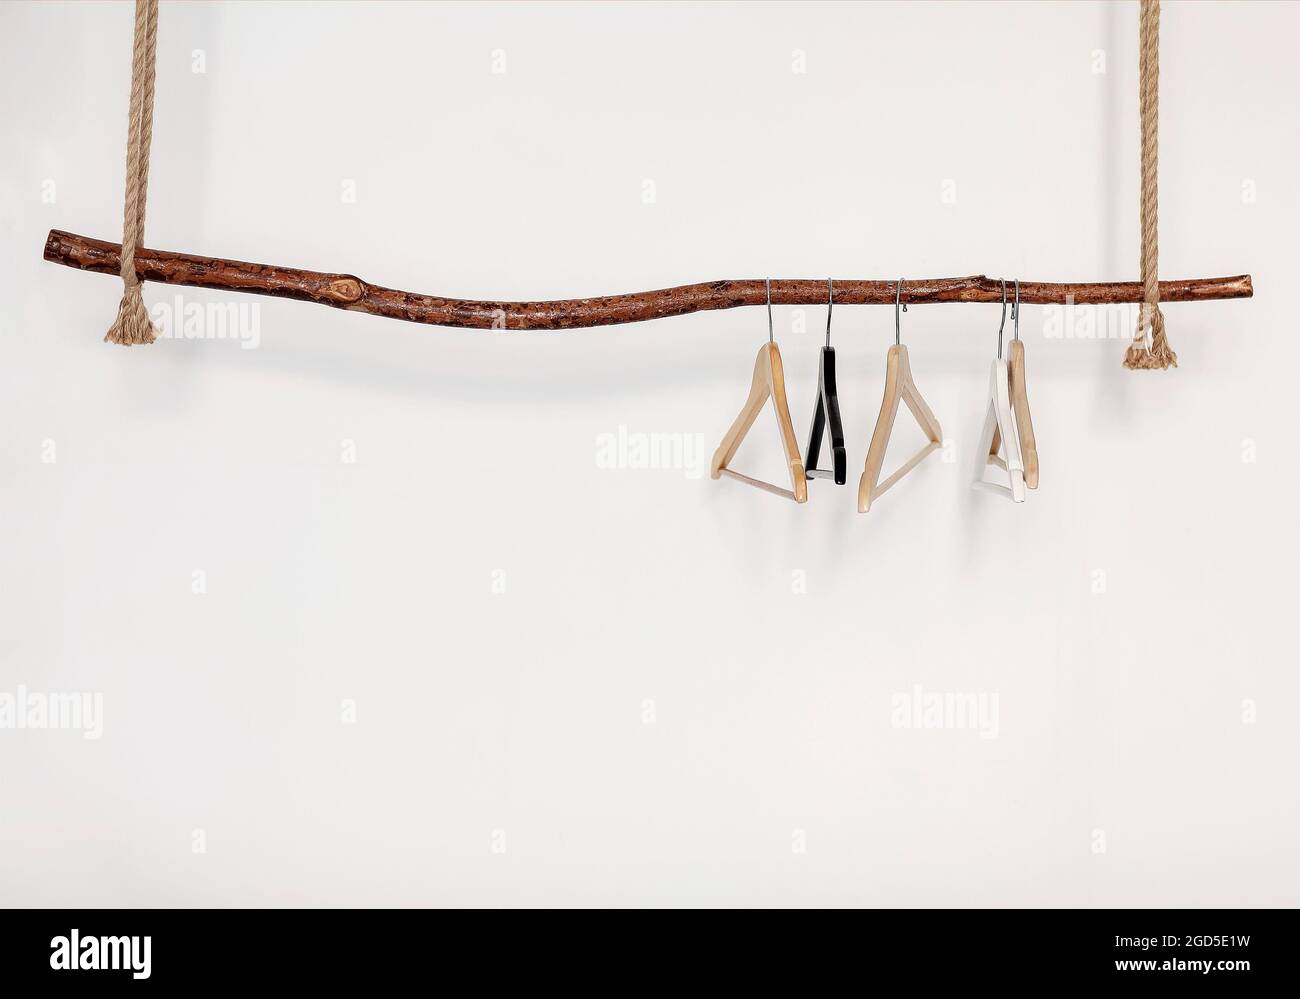 Five empty clothes hangers hanging on wooden rustic style rod on thick rope,  isolated over white wall Stock Photo - Alamy